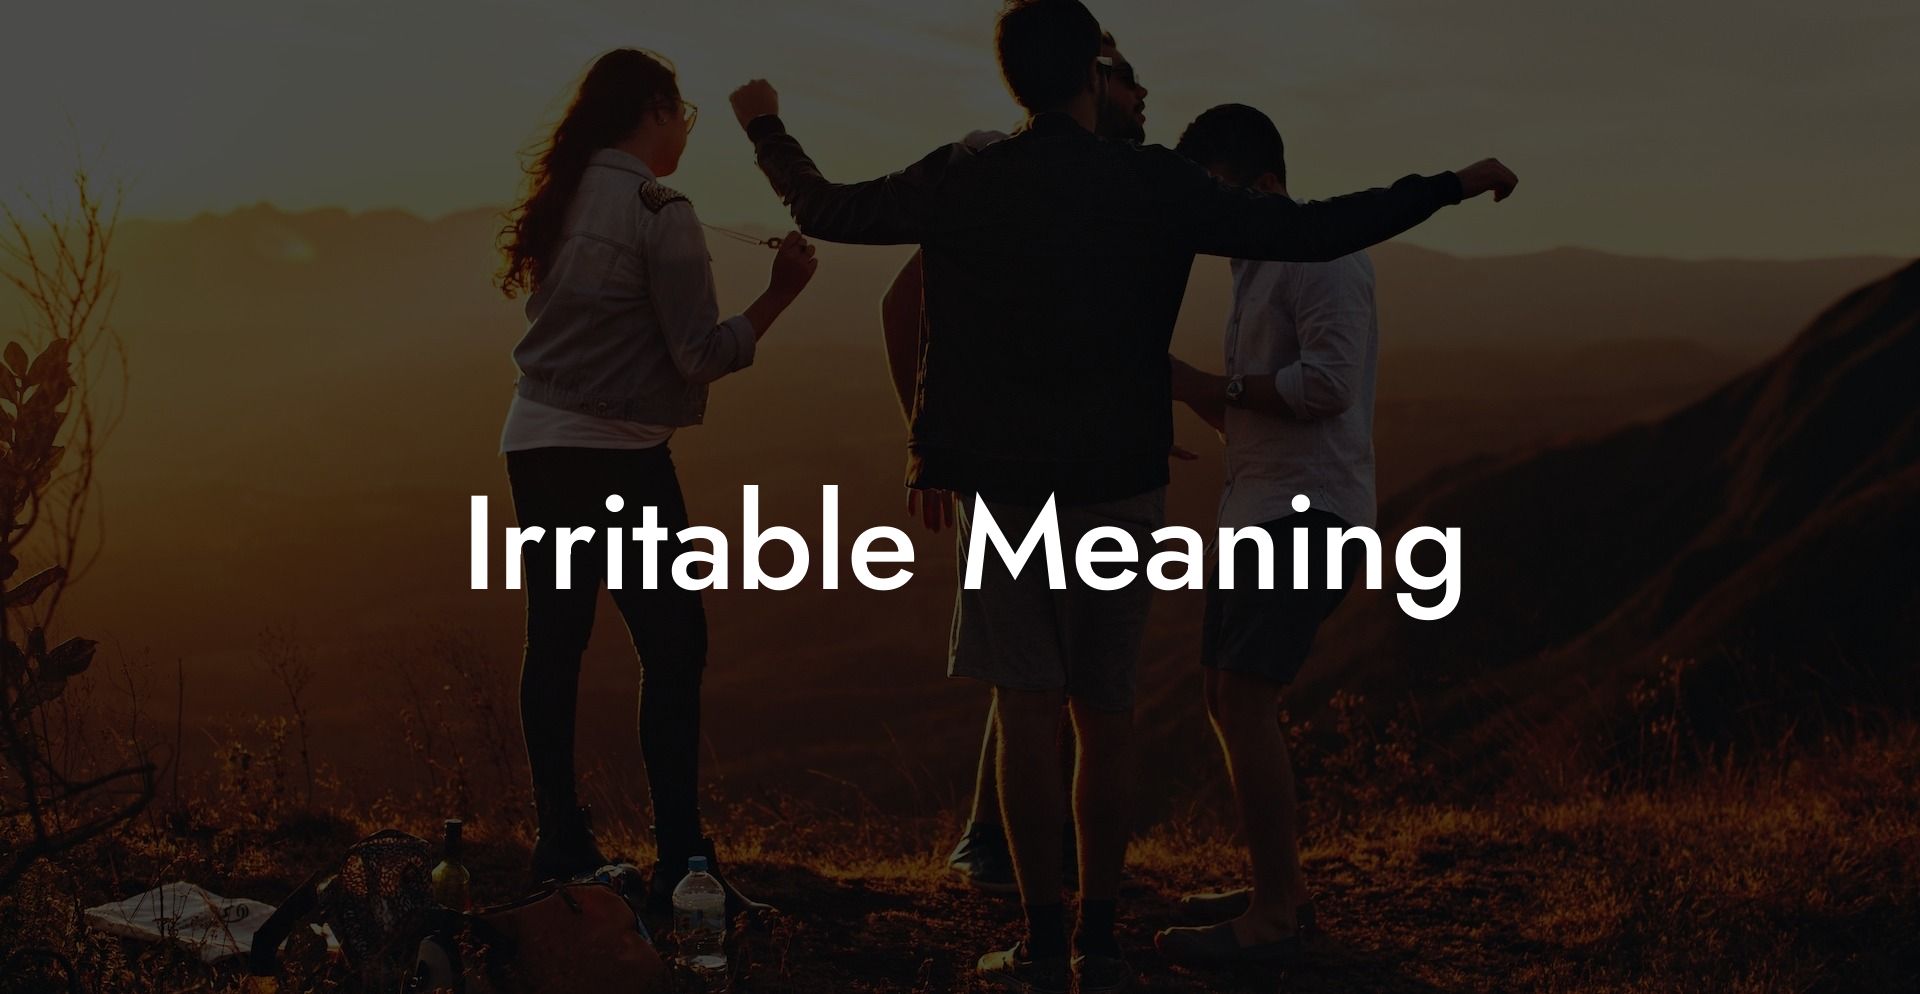 Irritable Meaning